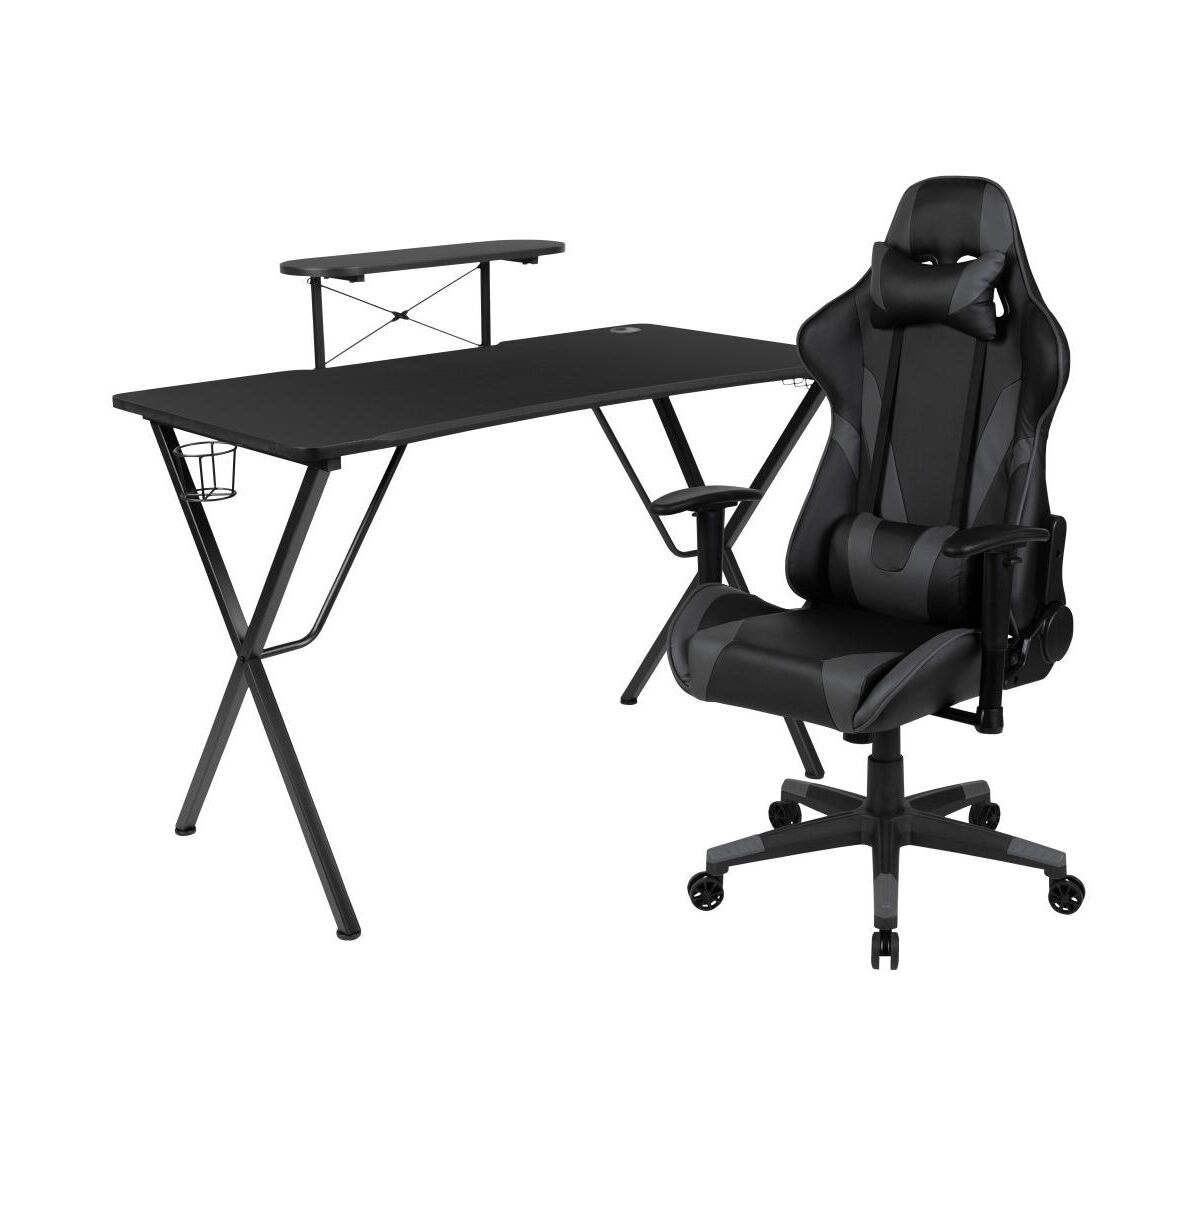 Emma+oliver Gaming Desk & Chair Set - Cup Holder, Headphone Hook, And Monitor Stand - Gray